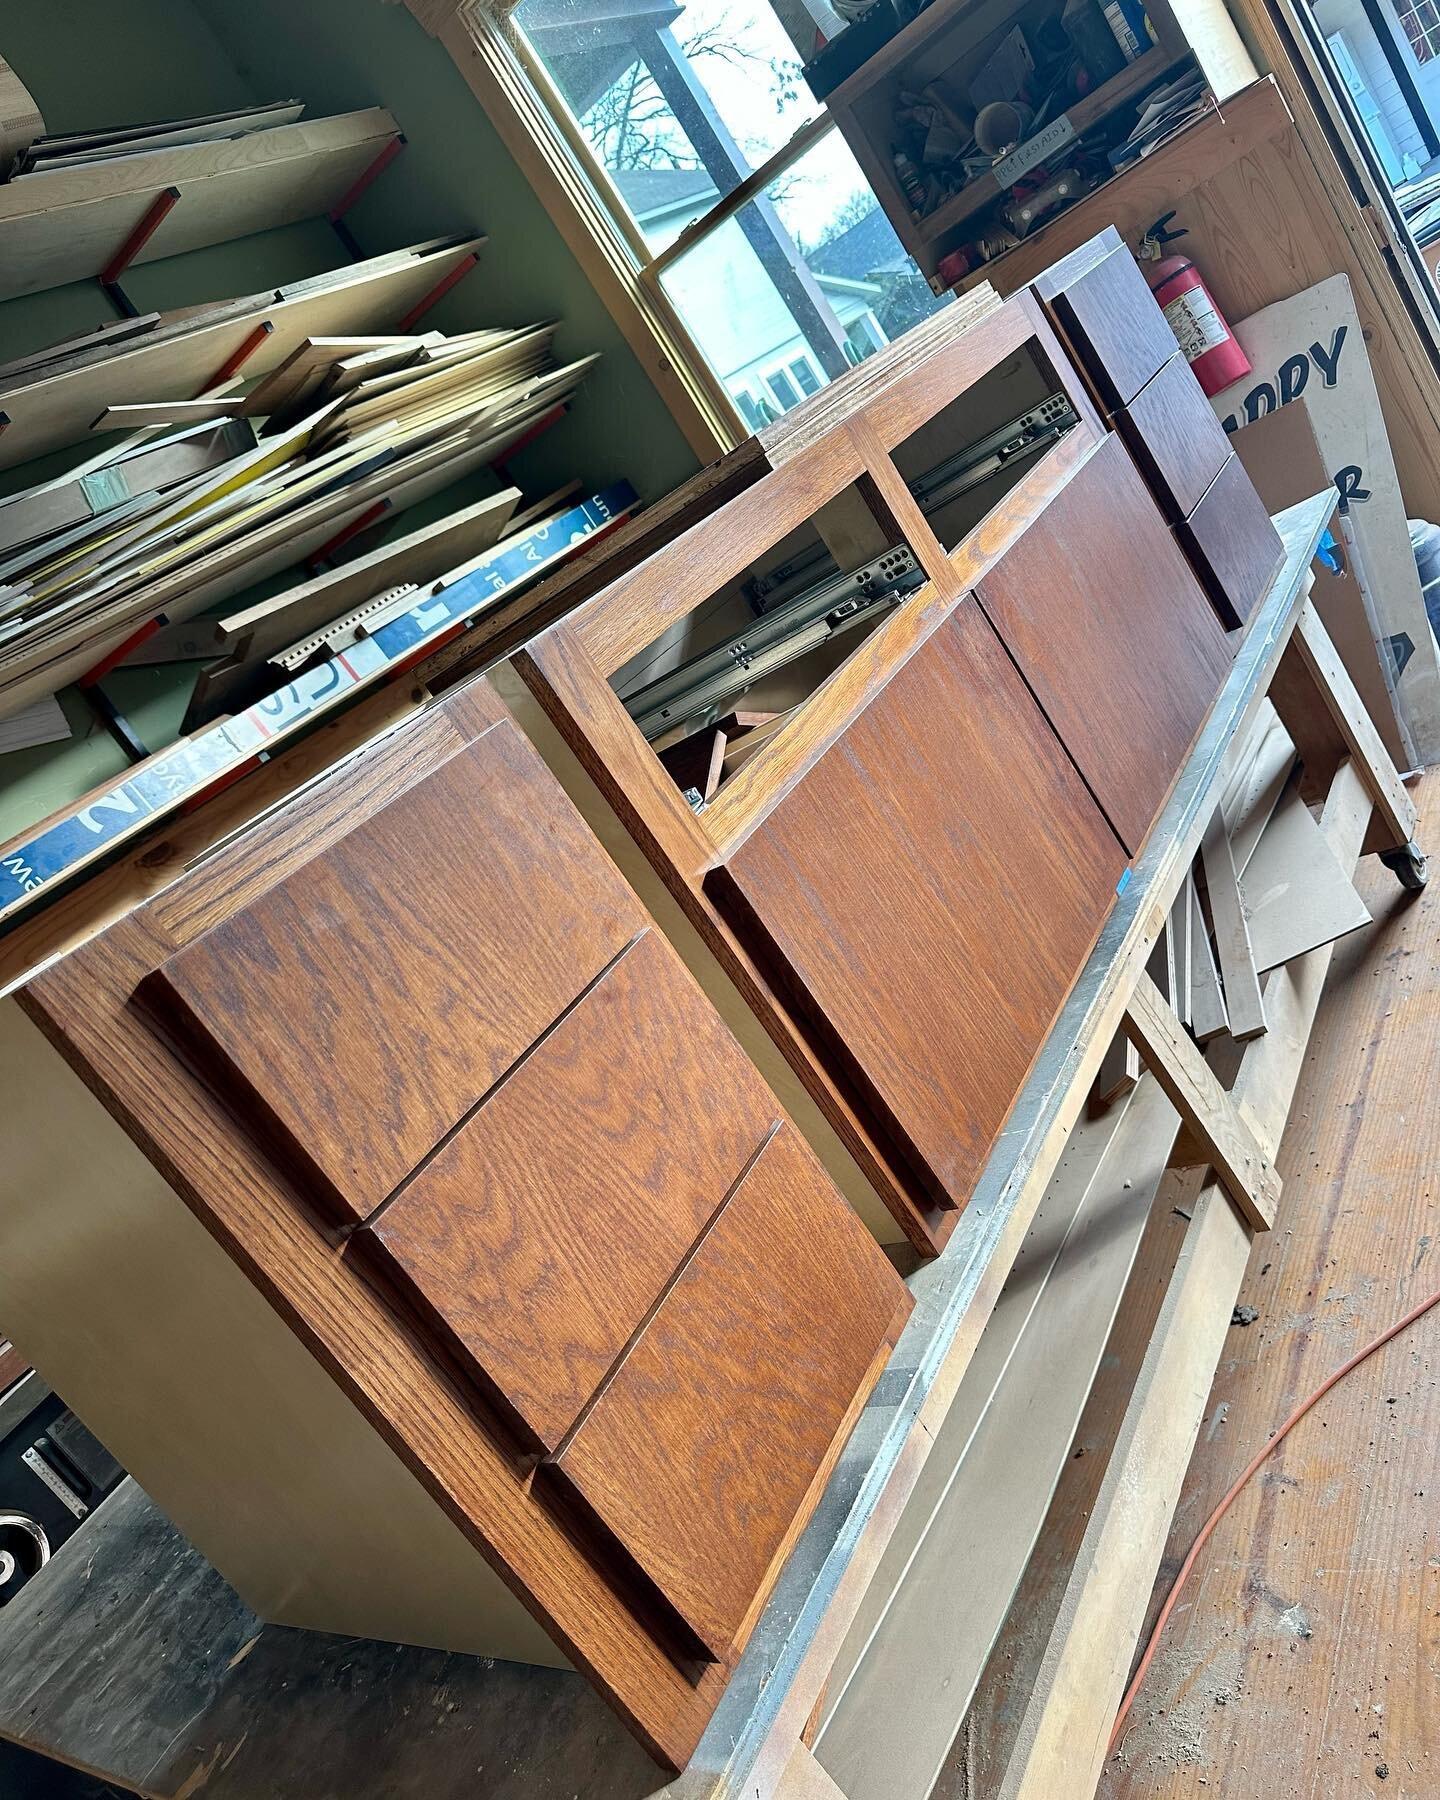 These white oak slab style bathroom cabinets with @generalfinishes hickory stain are finished up and ready to get loaded in the van for installation!

#craftsmanstyle #craftsman #whiteoak #builder #cabinets #bathroomcabinet #stain #stainedwood #hydep